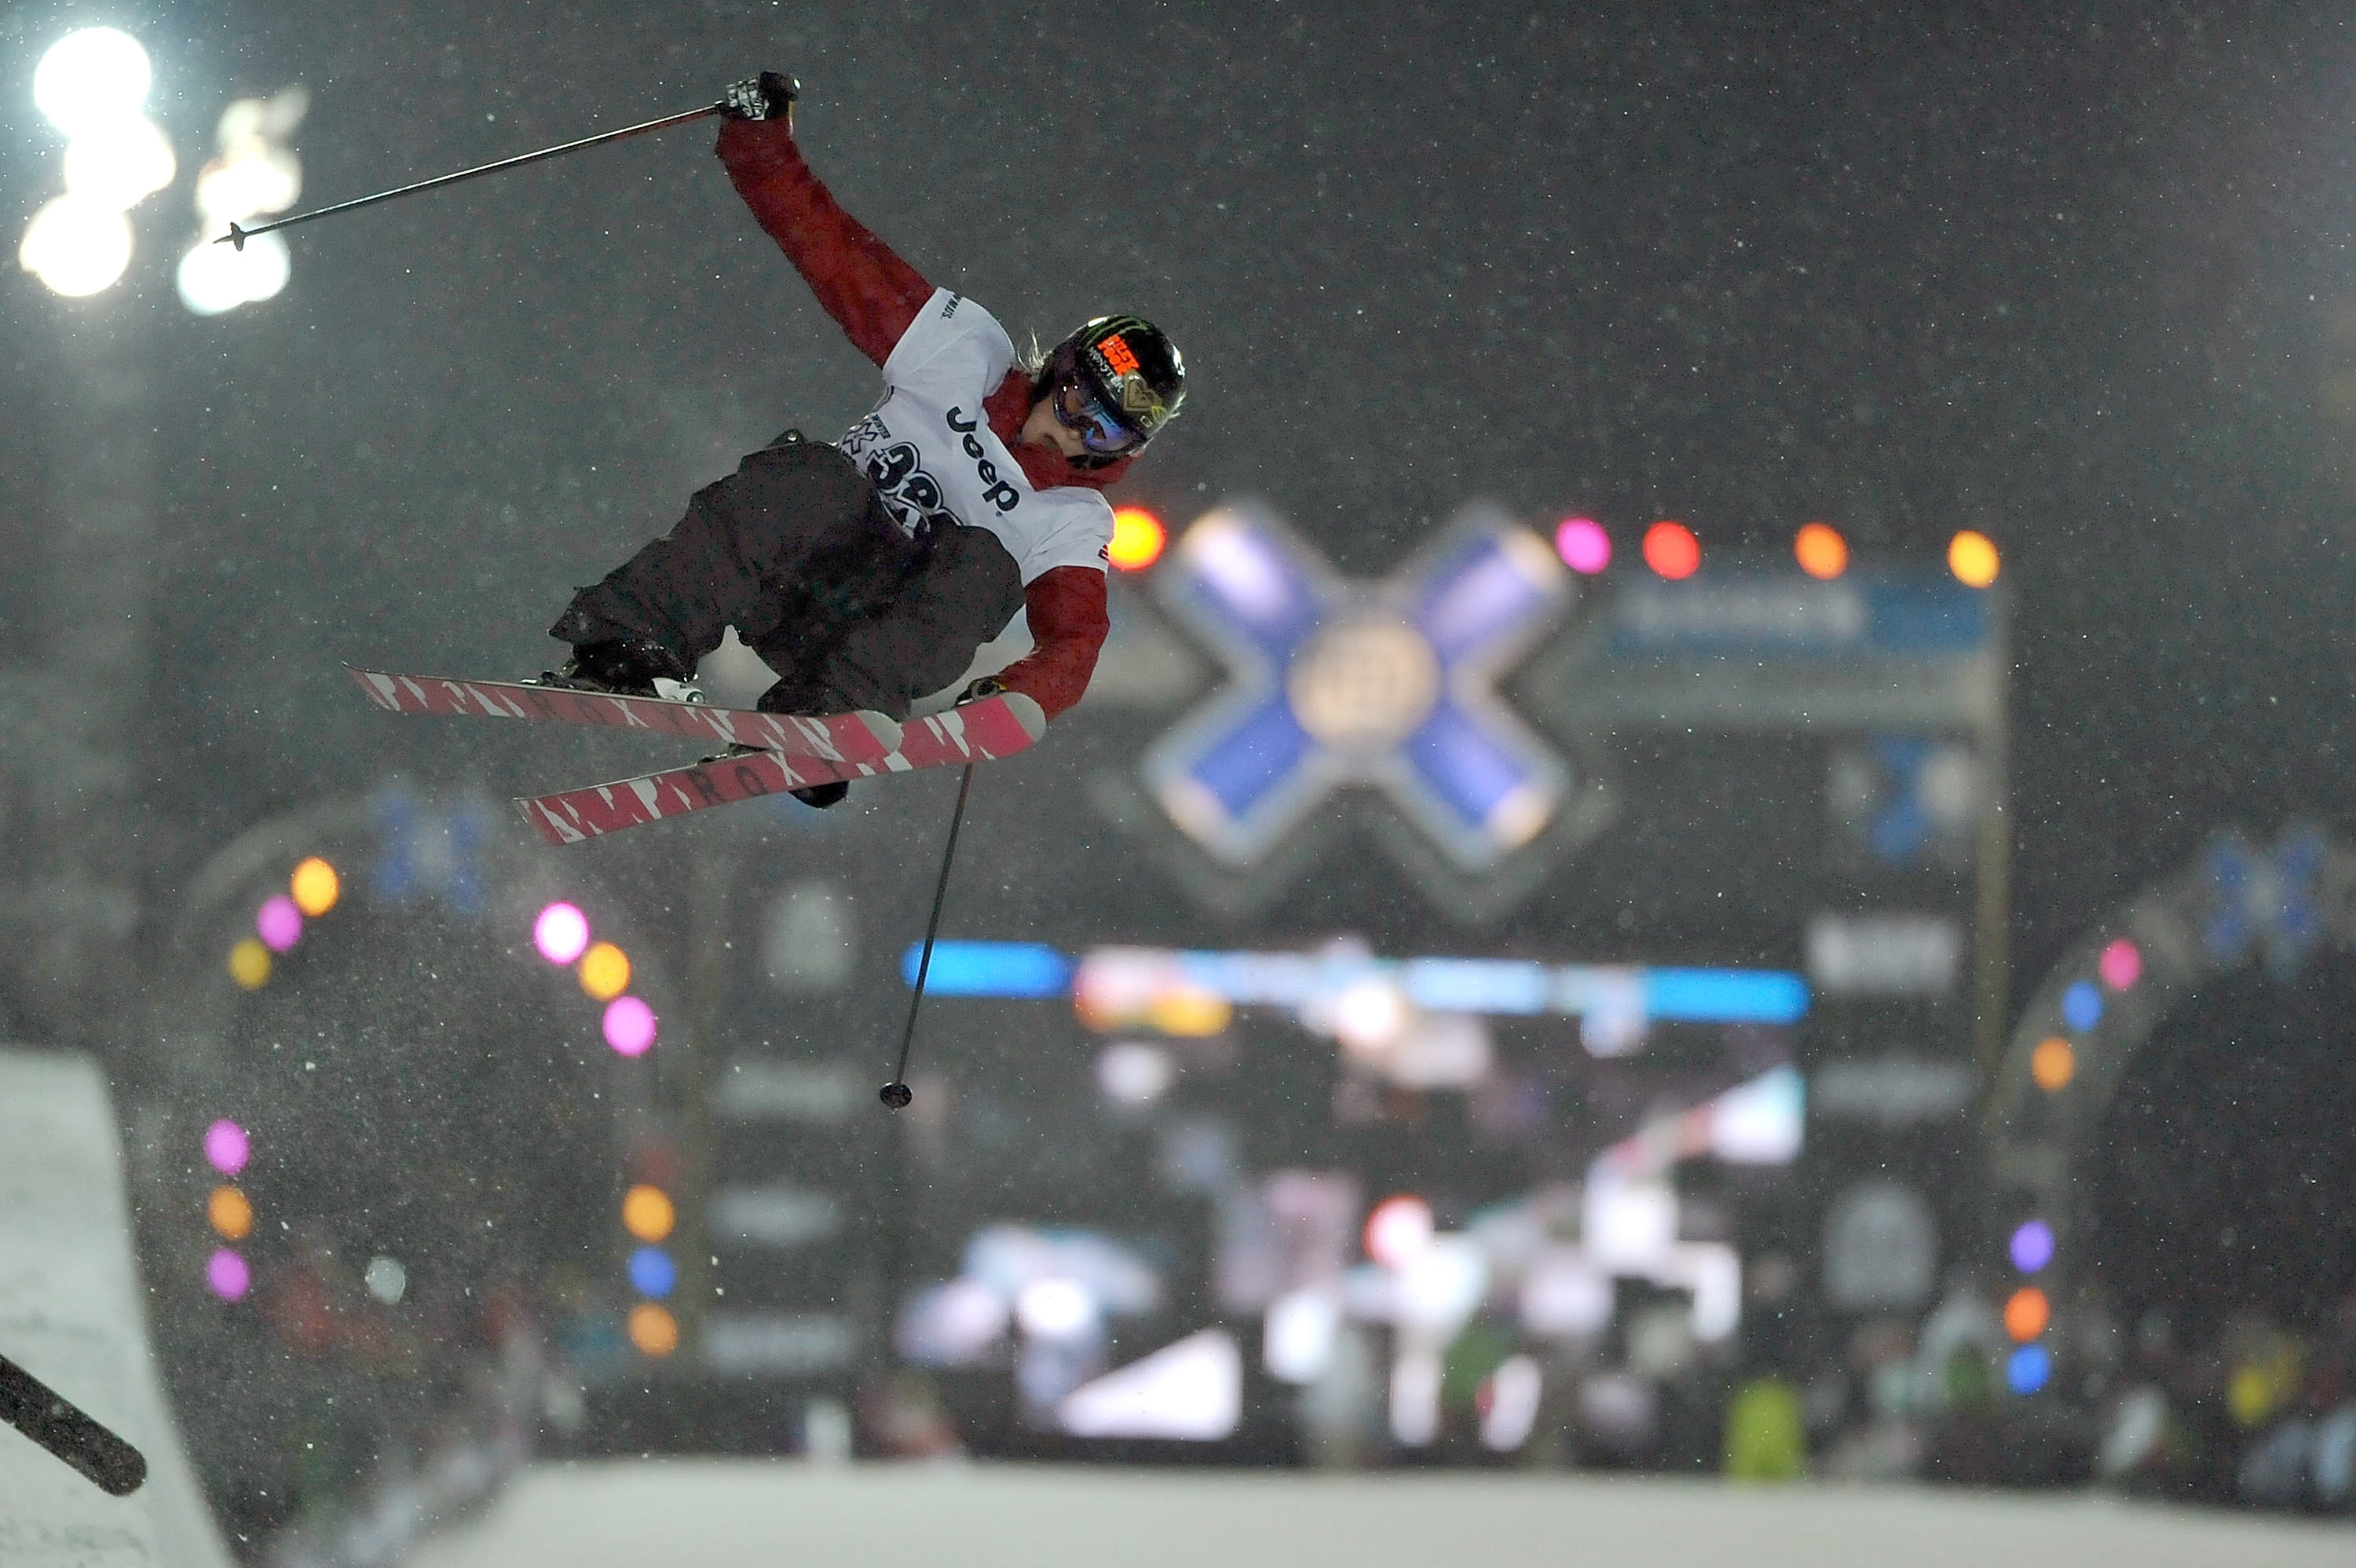 ASPEN, CO - JANUARY 23:  Sarah Burke participates in the Women's Skiing Superpipe Final on her way to winning the gold during Winter X Games 13 January 23, 2009 at Buttermilk Mountain in Aspen, Colorado.  (Photo by Jonathan Moore/Getty Images)